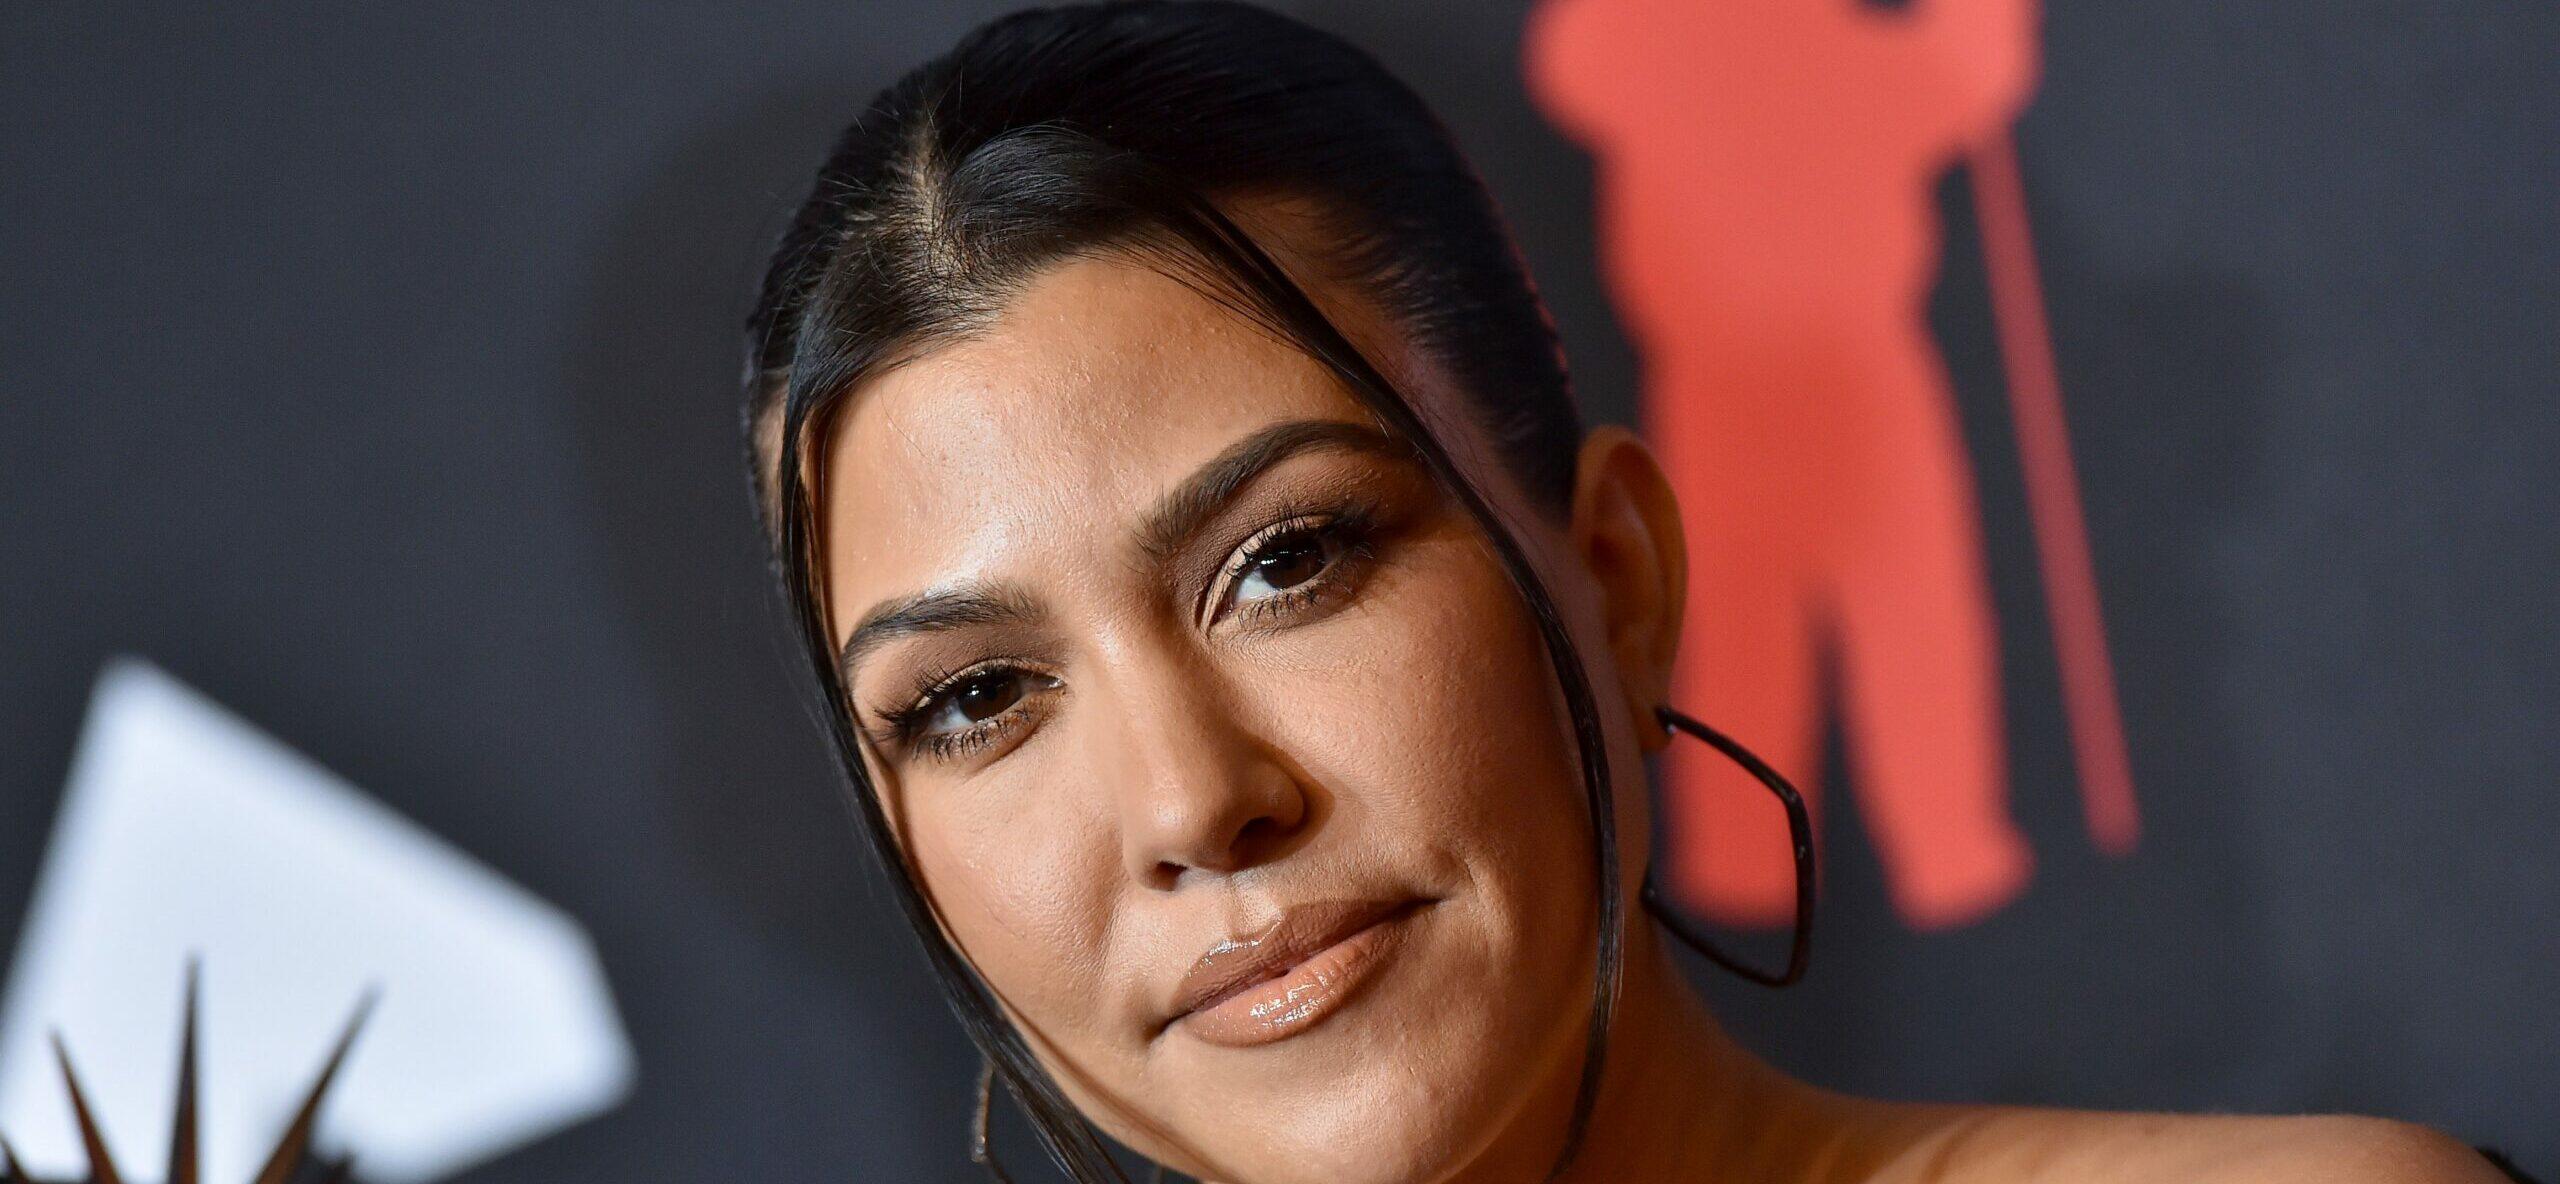 Kourtney Kardashian Gets Trolled By Fans For Posting ‘Disgusting’ Pics In Her Bathroom